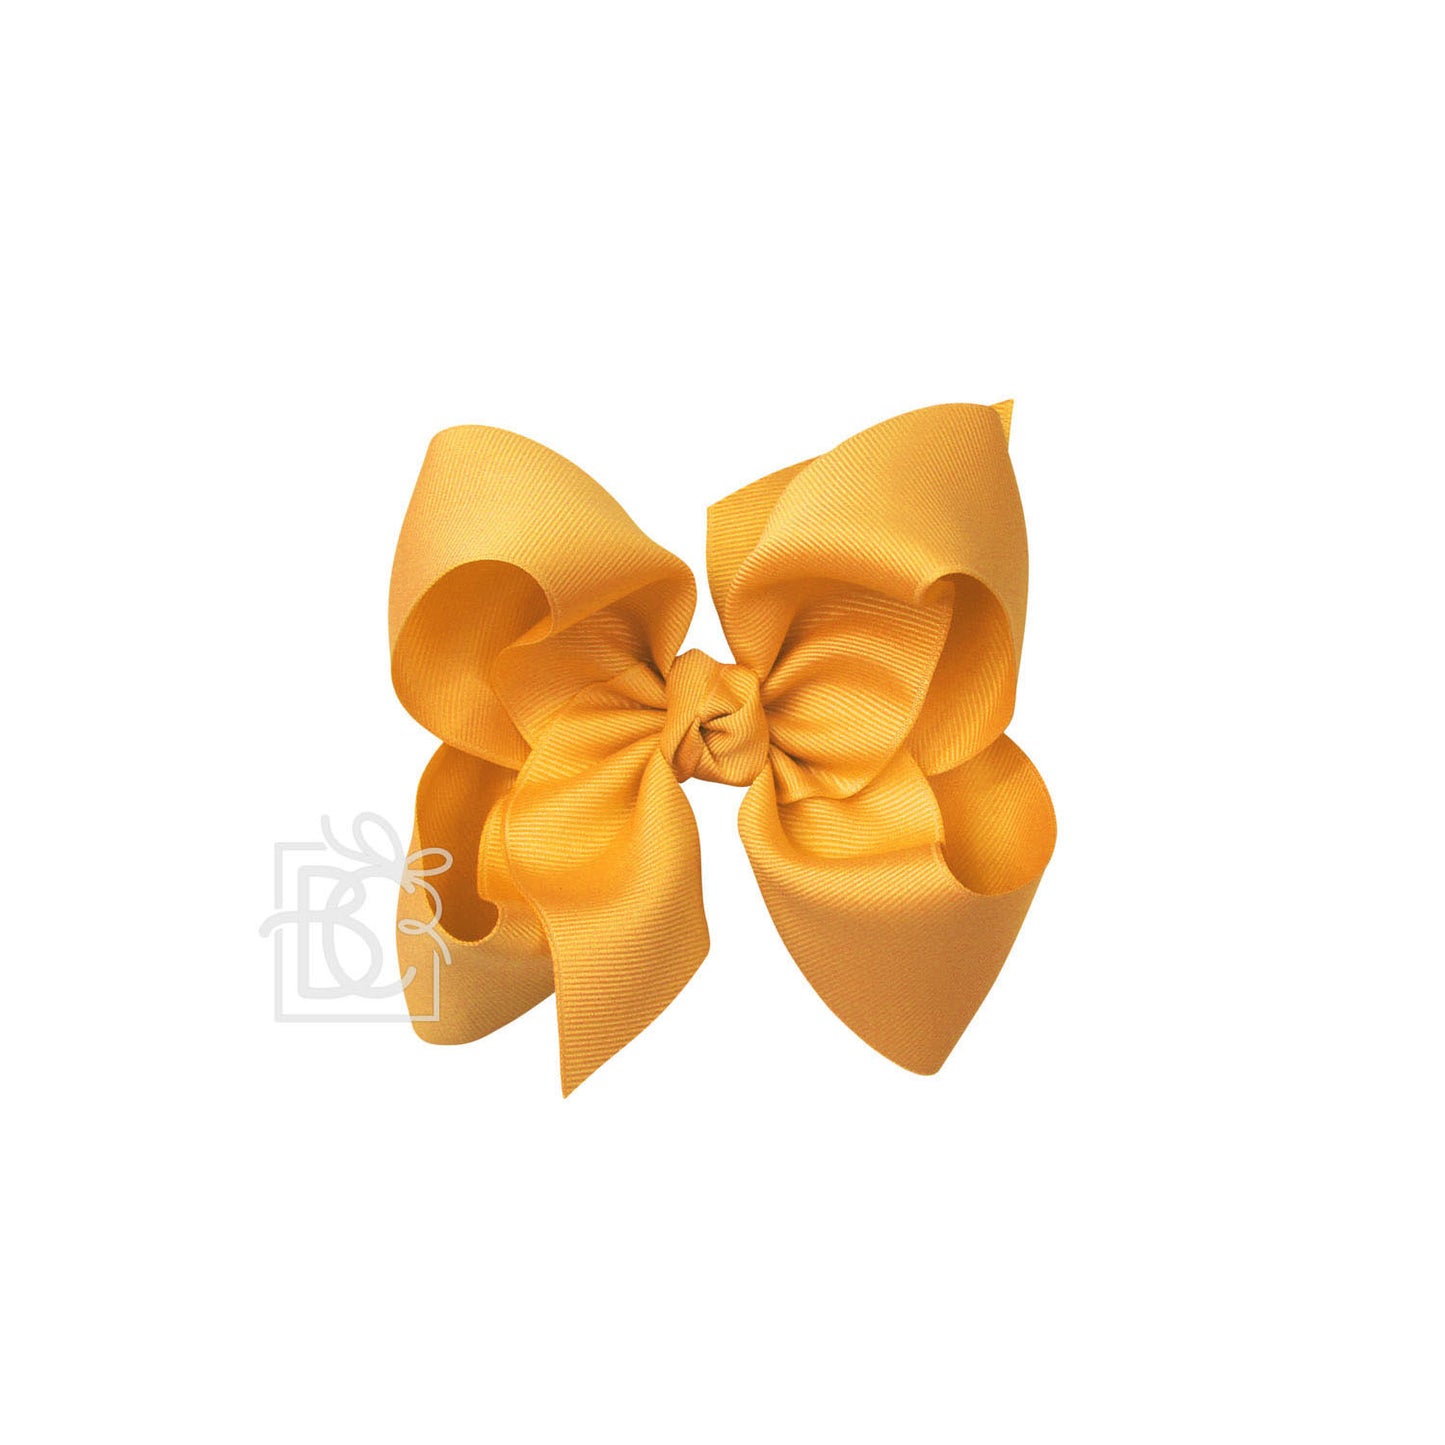 Huge Bow in Yellow Gold  - Doodlebug's Children's Boutique